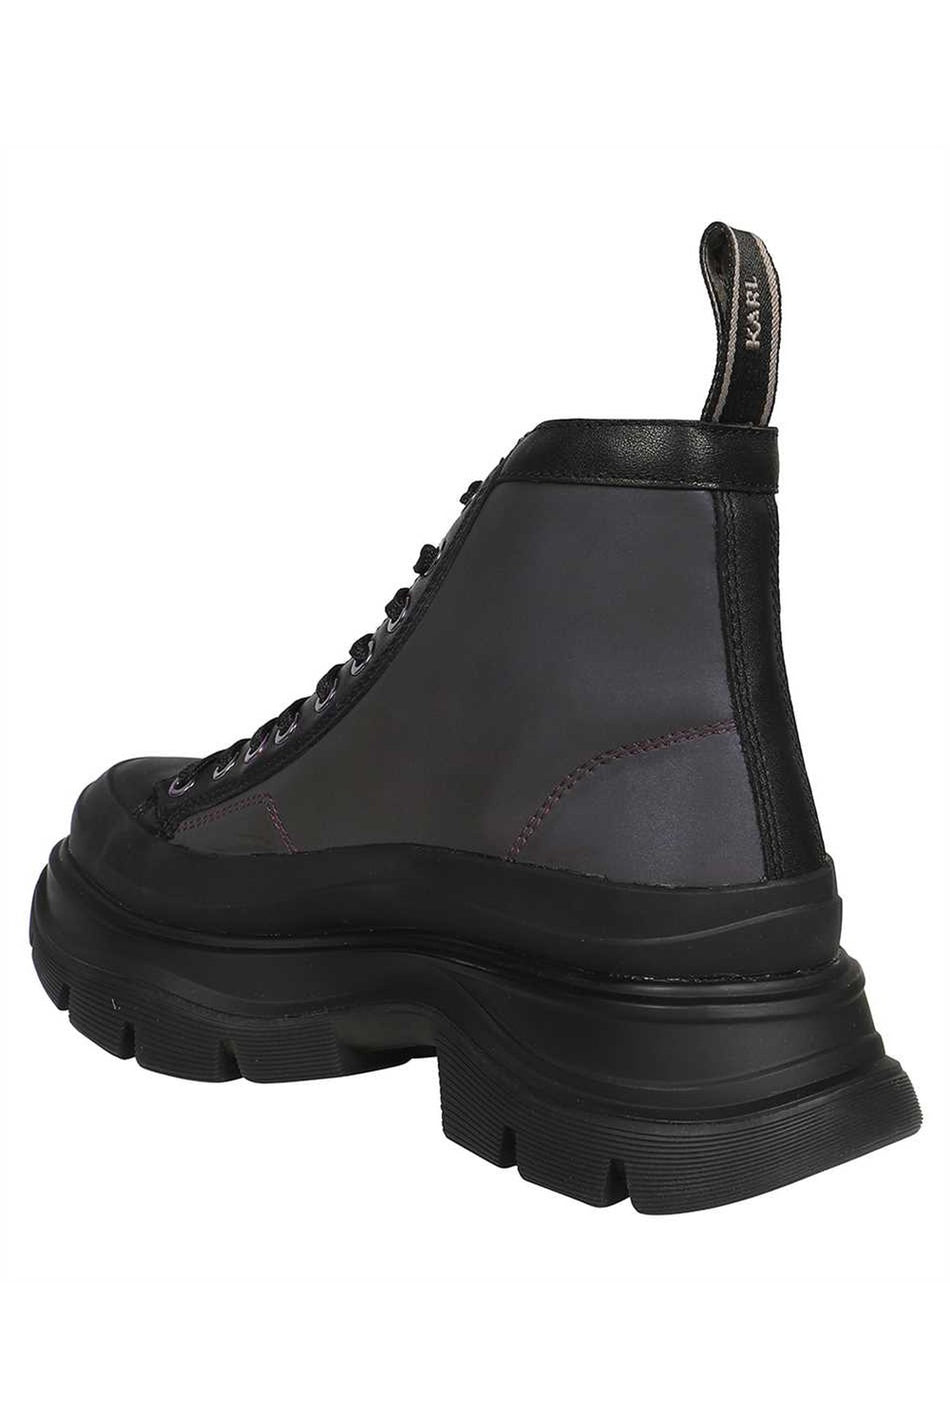 Lace-up ankle boots-Karl Lagerfeld-OUTLET-SALE-ARCHIVIST